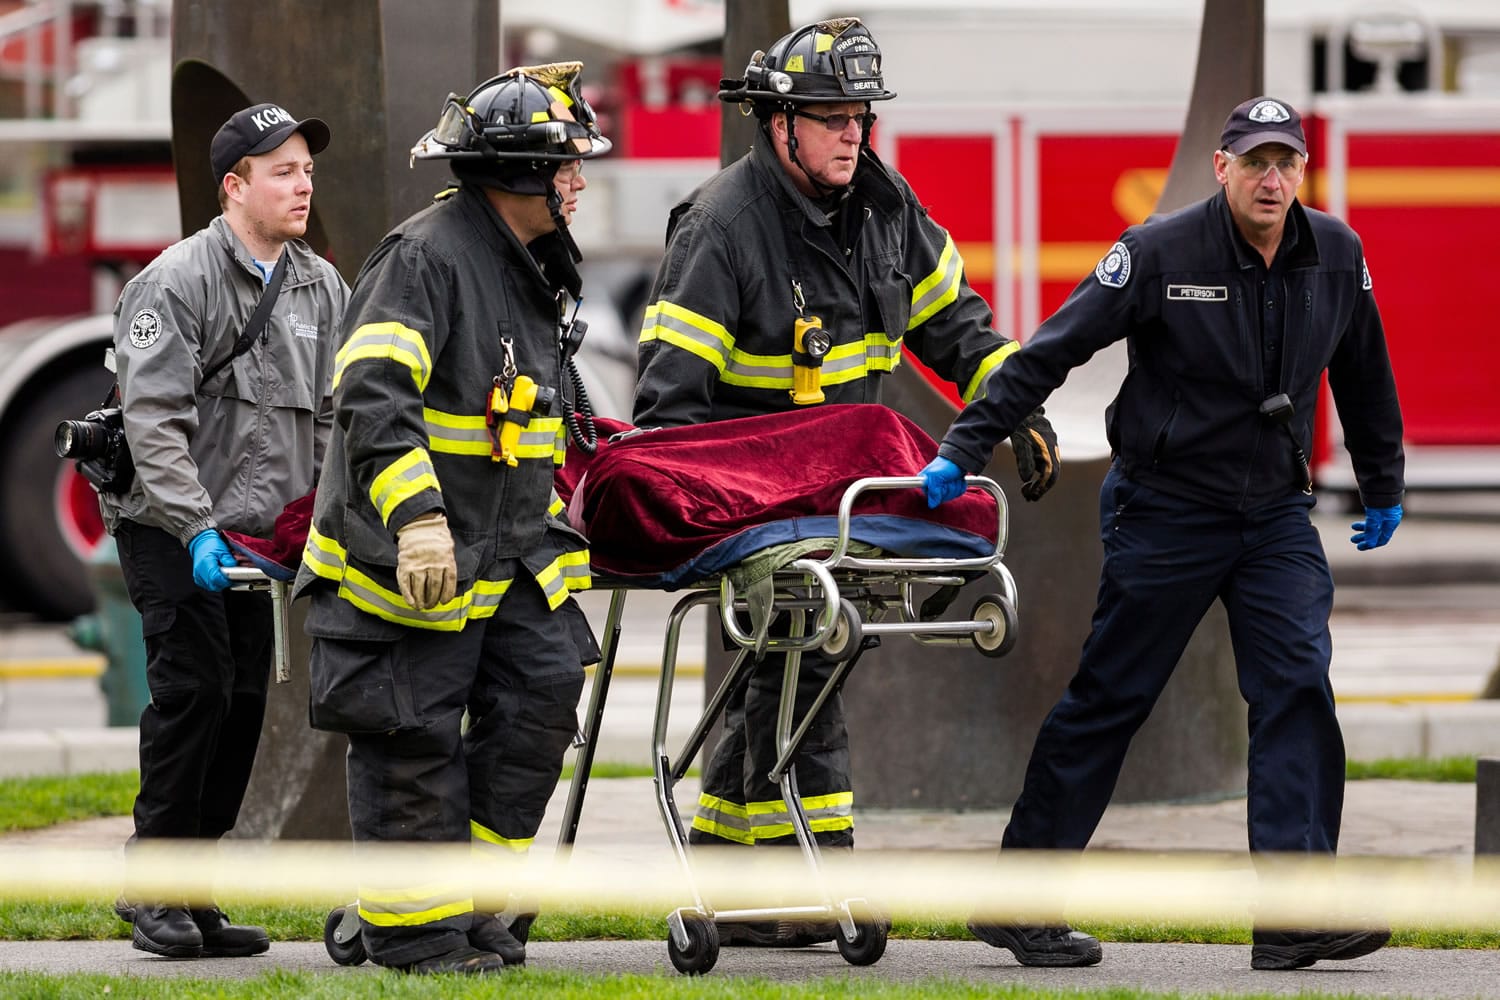 Emergency personnel wheel away one of two bodies from the aftermath of a news helicopter crash Tuesday in Seattle.